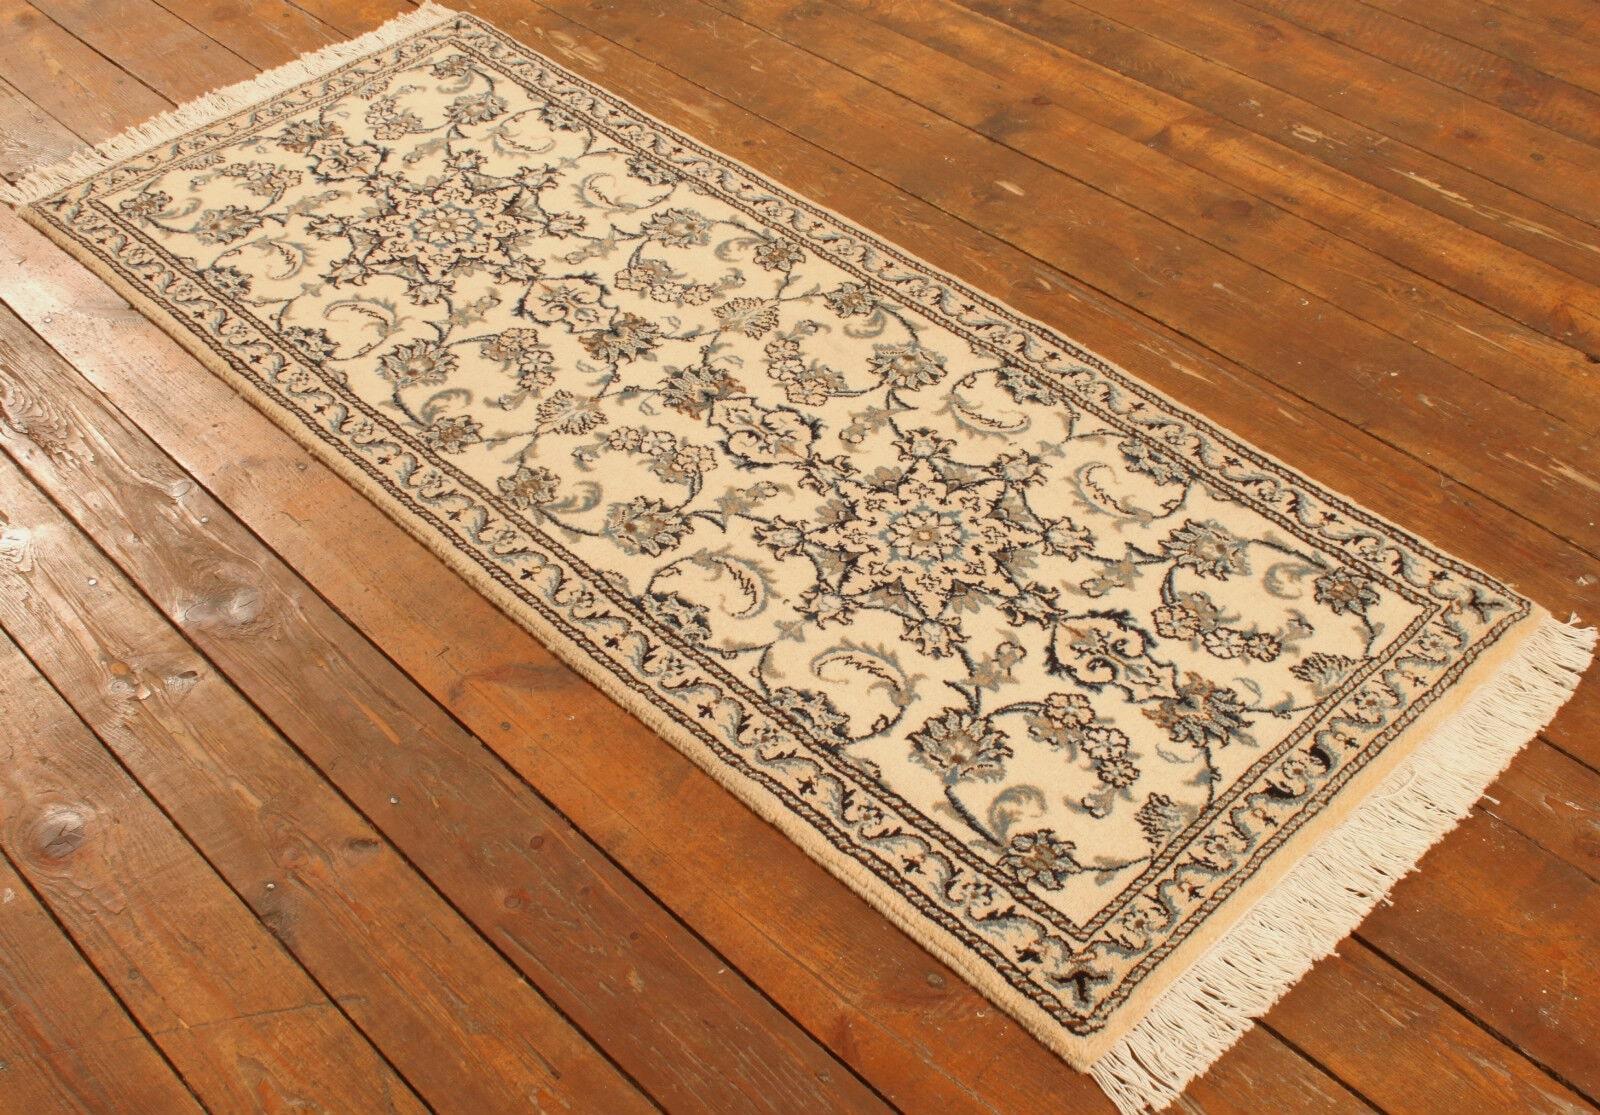 Handmade Vintage Persian Style Nain Runner Rug 2.5' x 6.3', 1980s - 1T50 For Sale 2